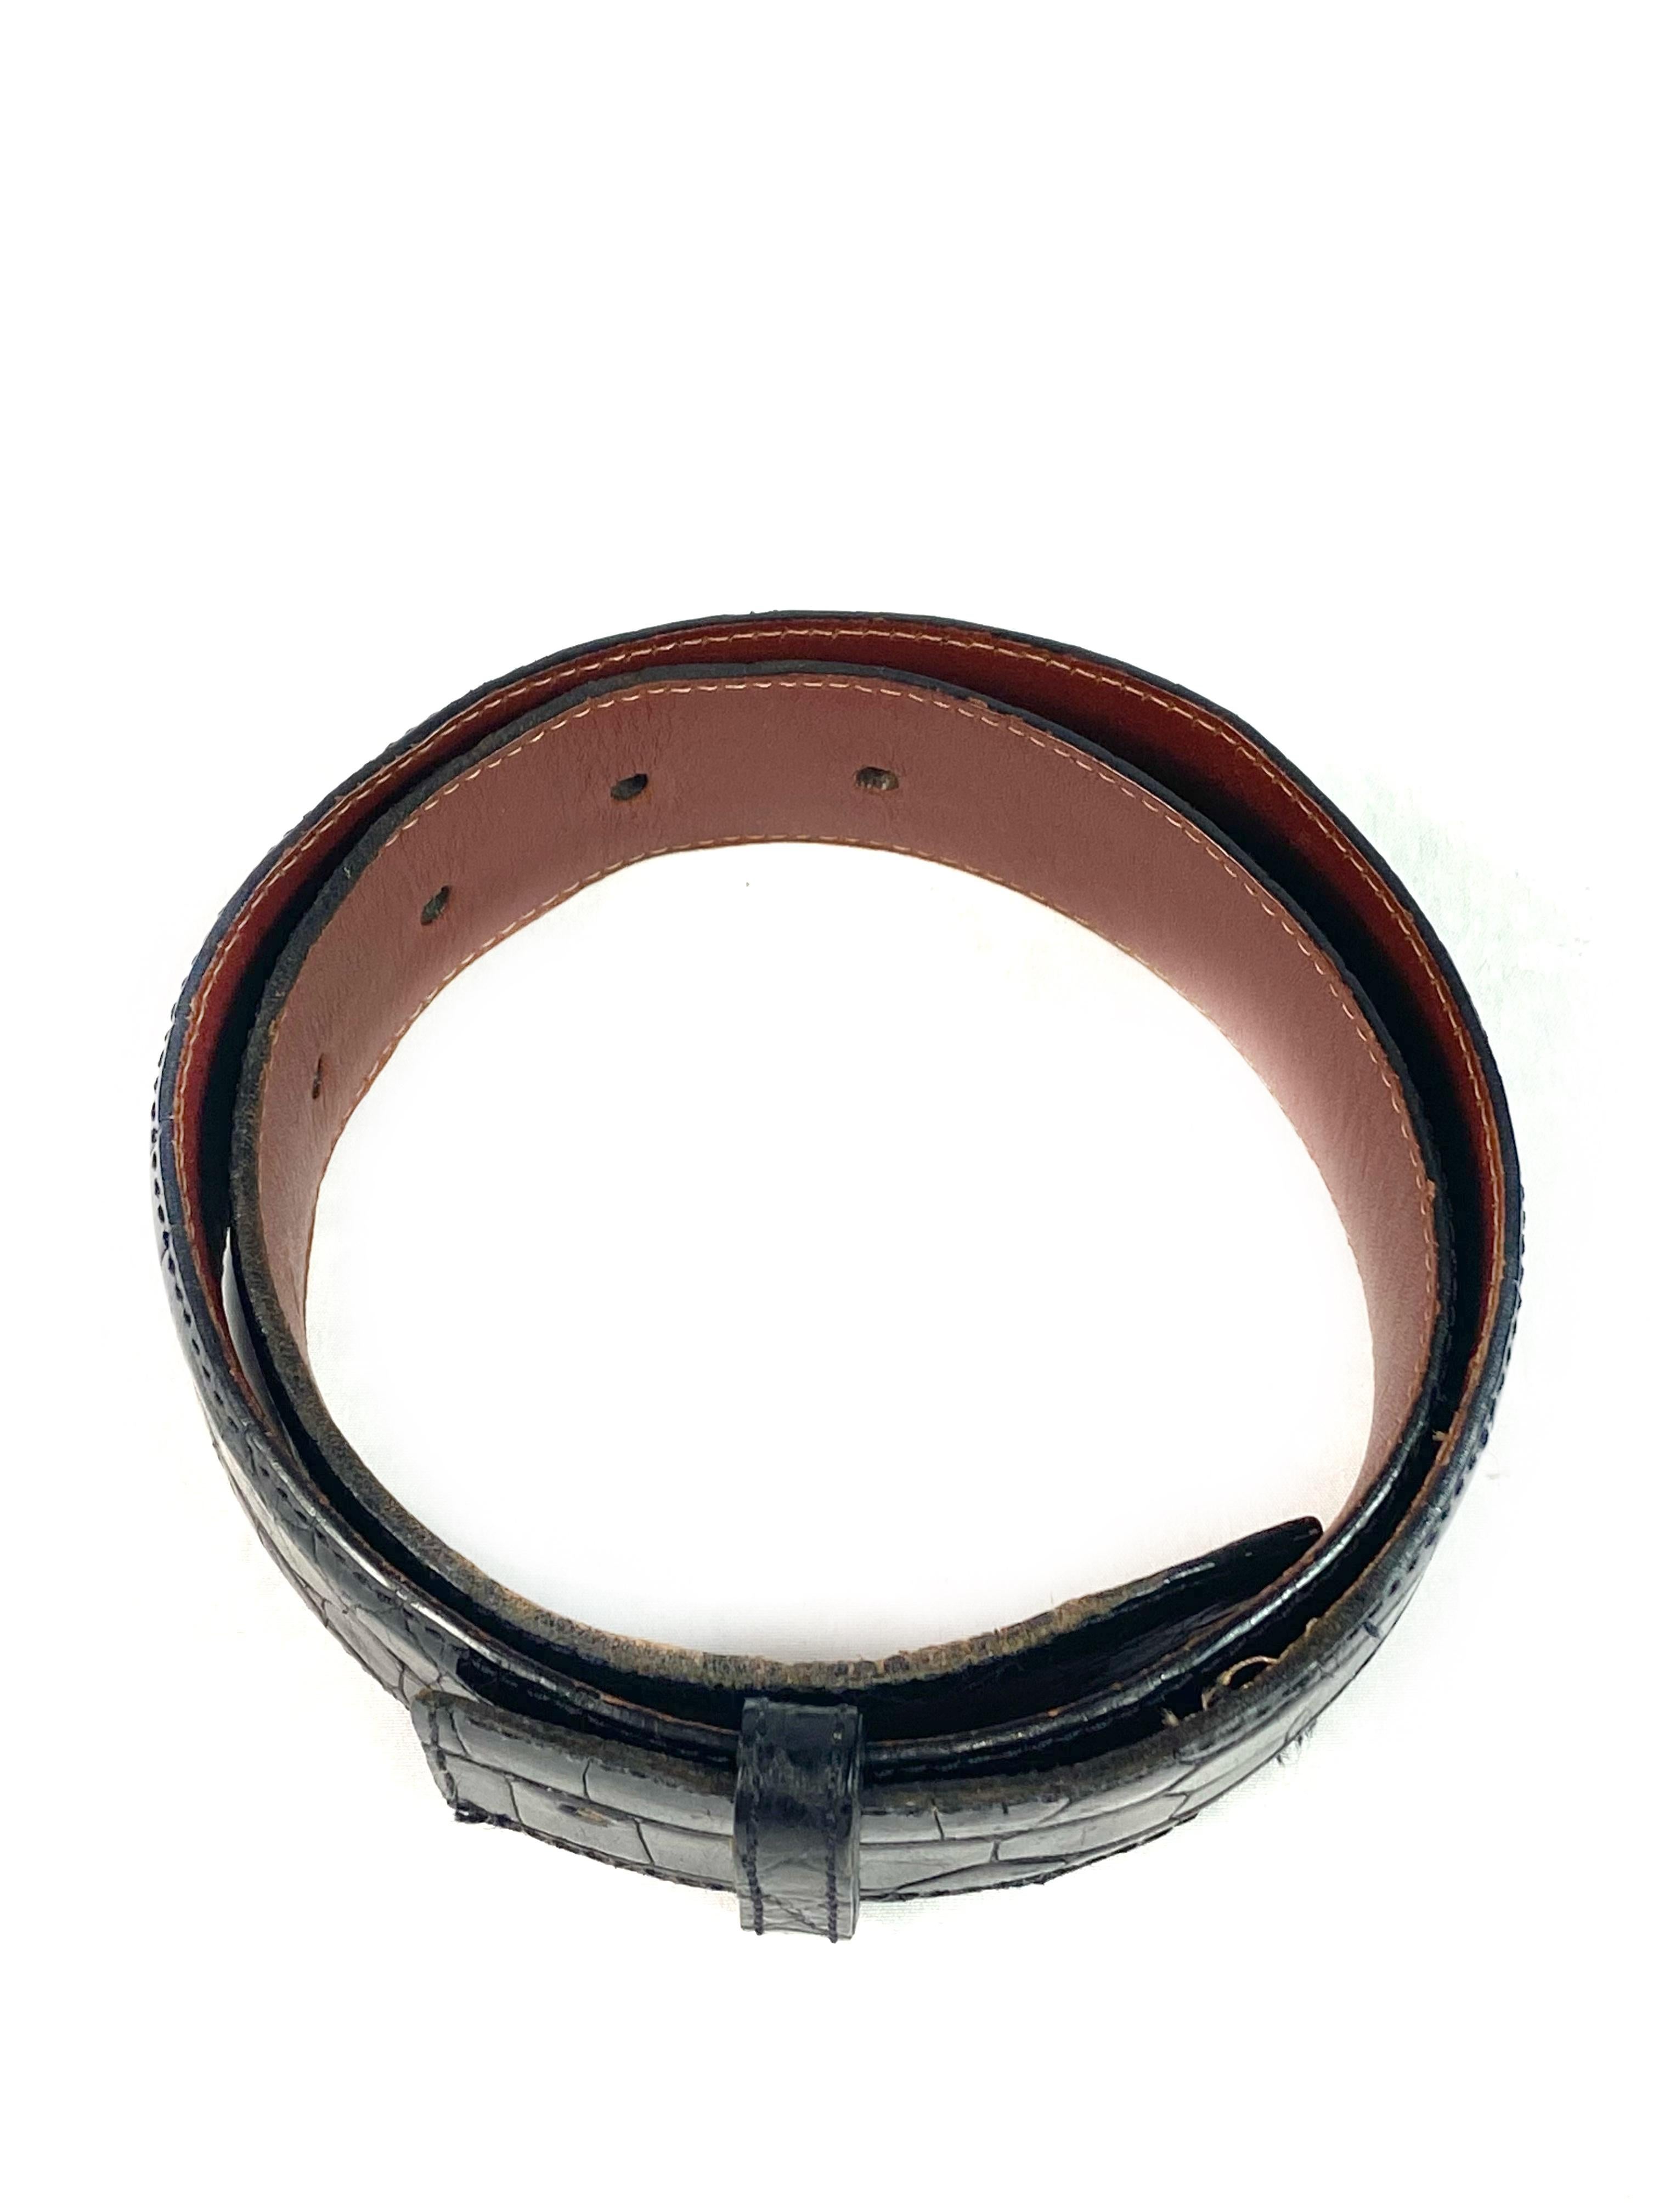 Product details:

The bet features black and shiny finish on the outside and brown leather on the inside. The belt does not come with the buckle.